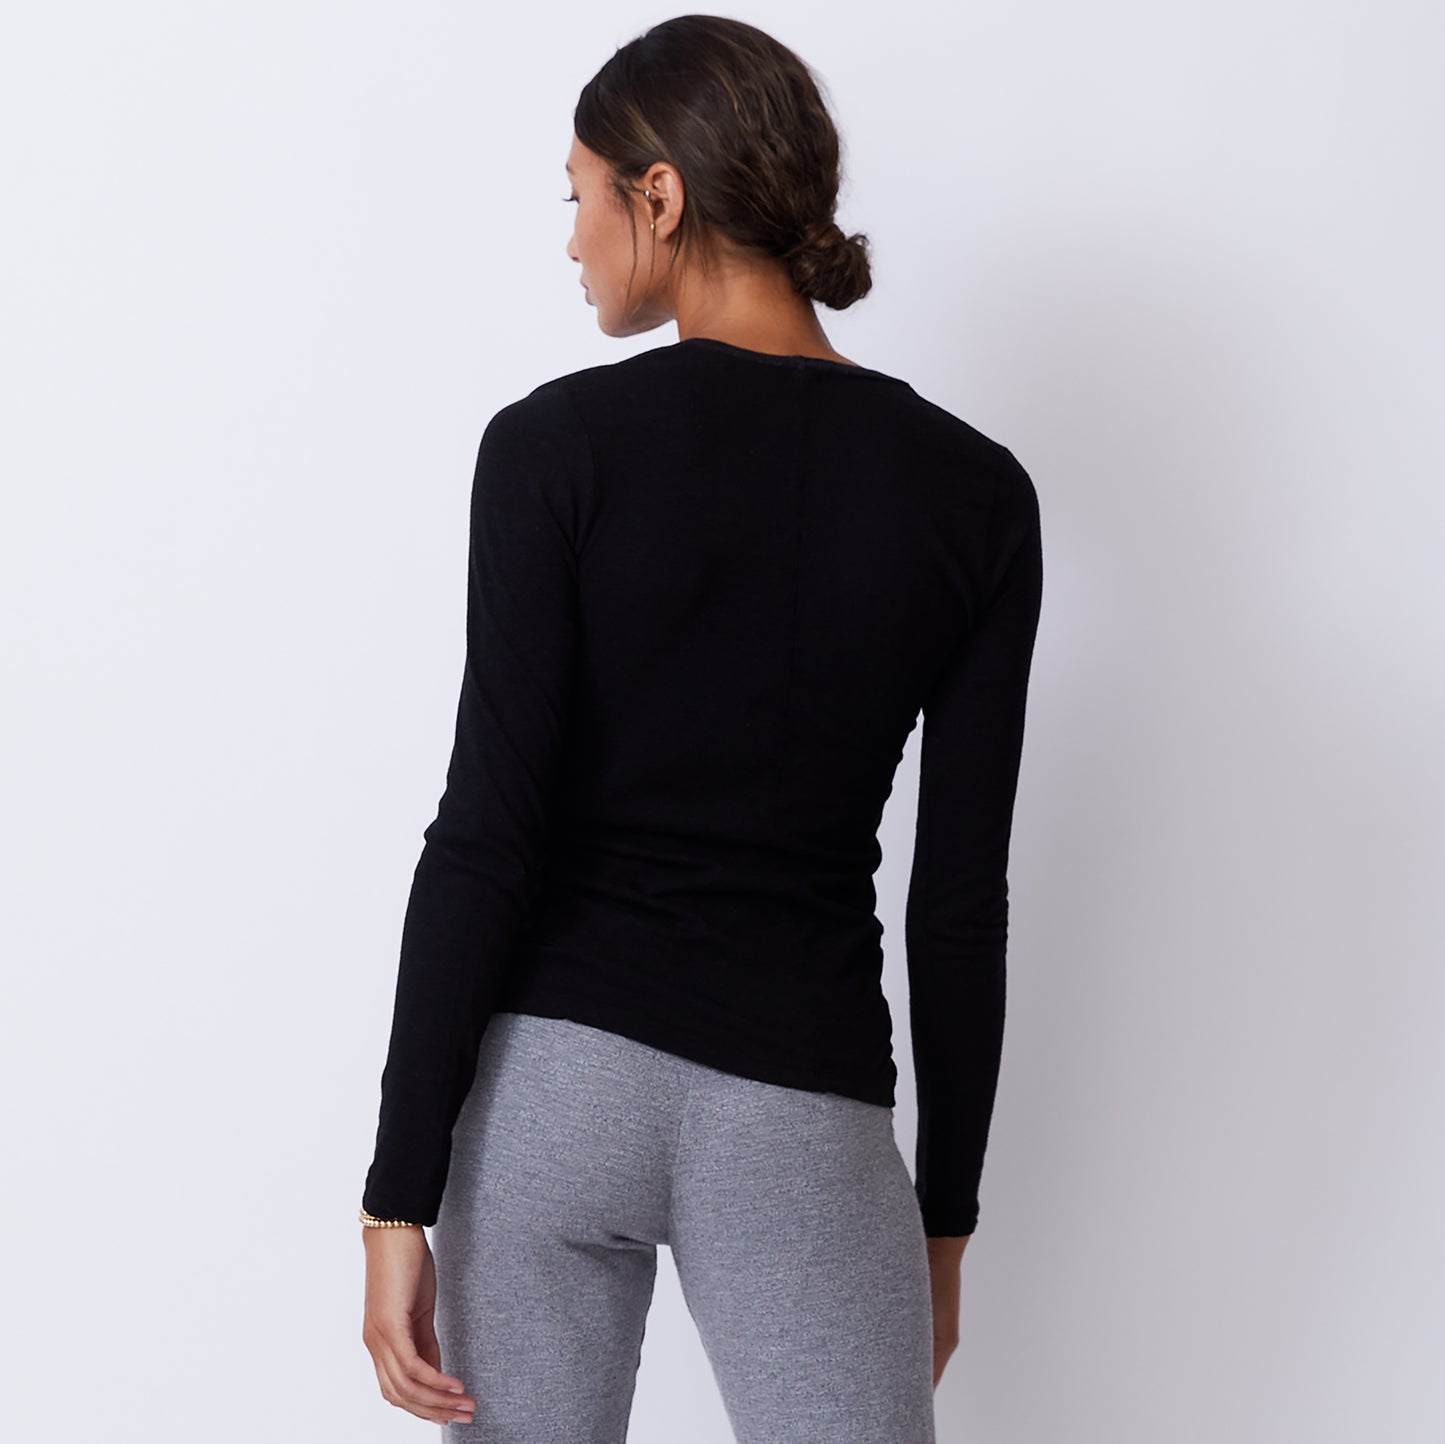 Textured Tri-Blend Fitted Long Sleeve V Neck Tee (9535392196)